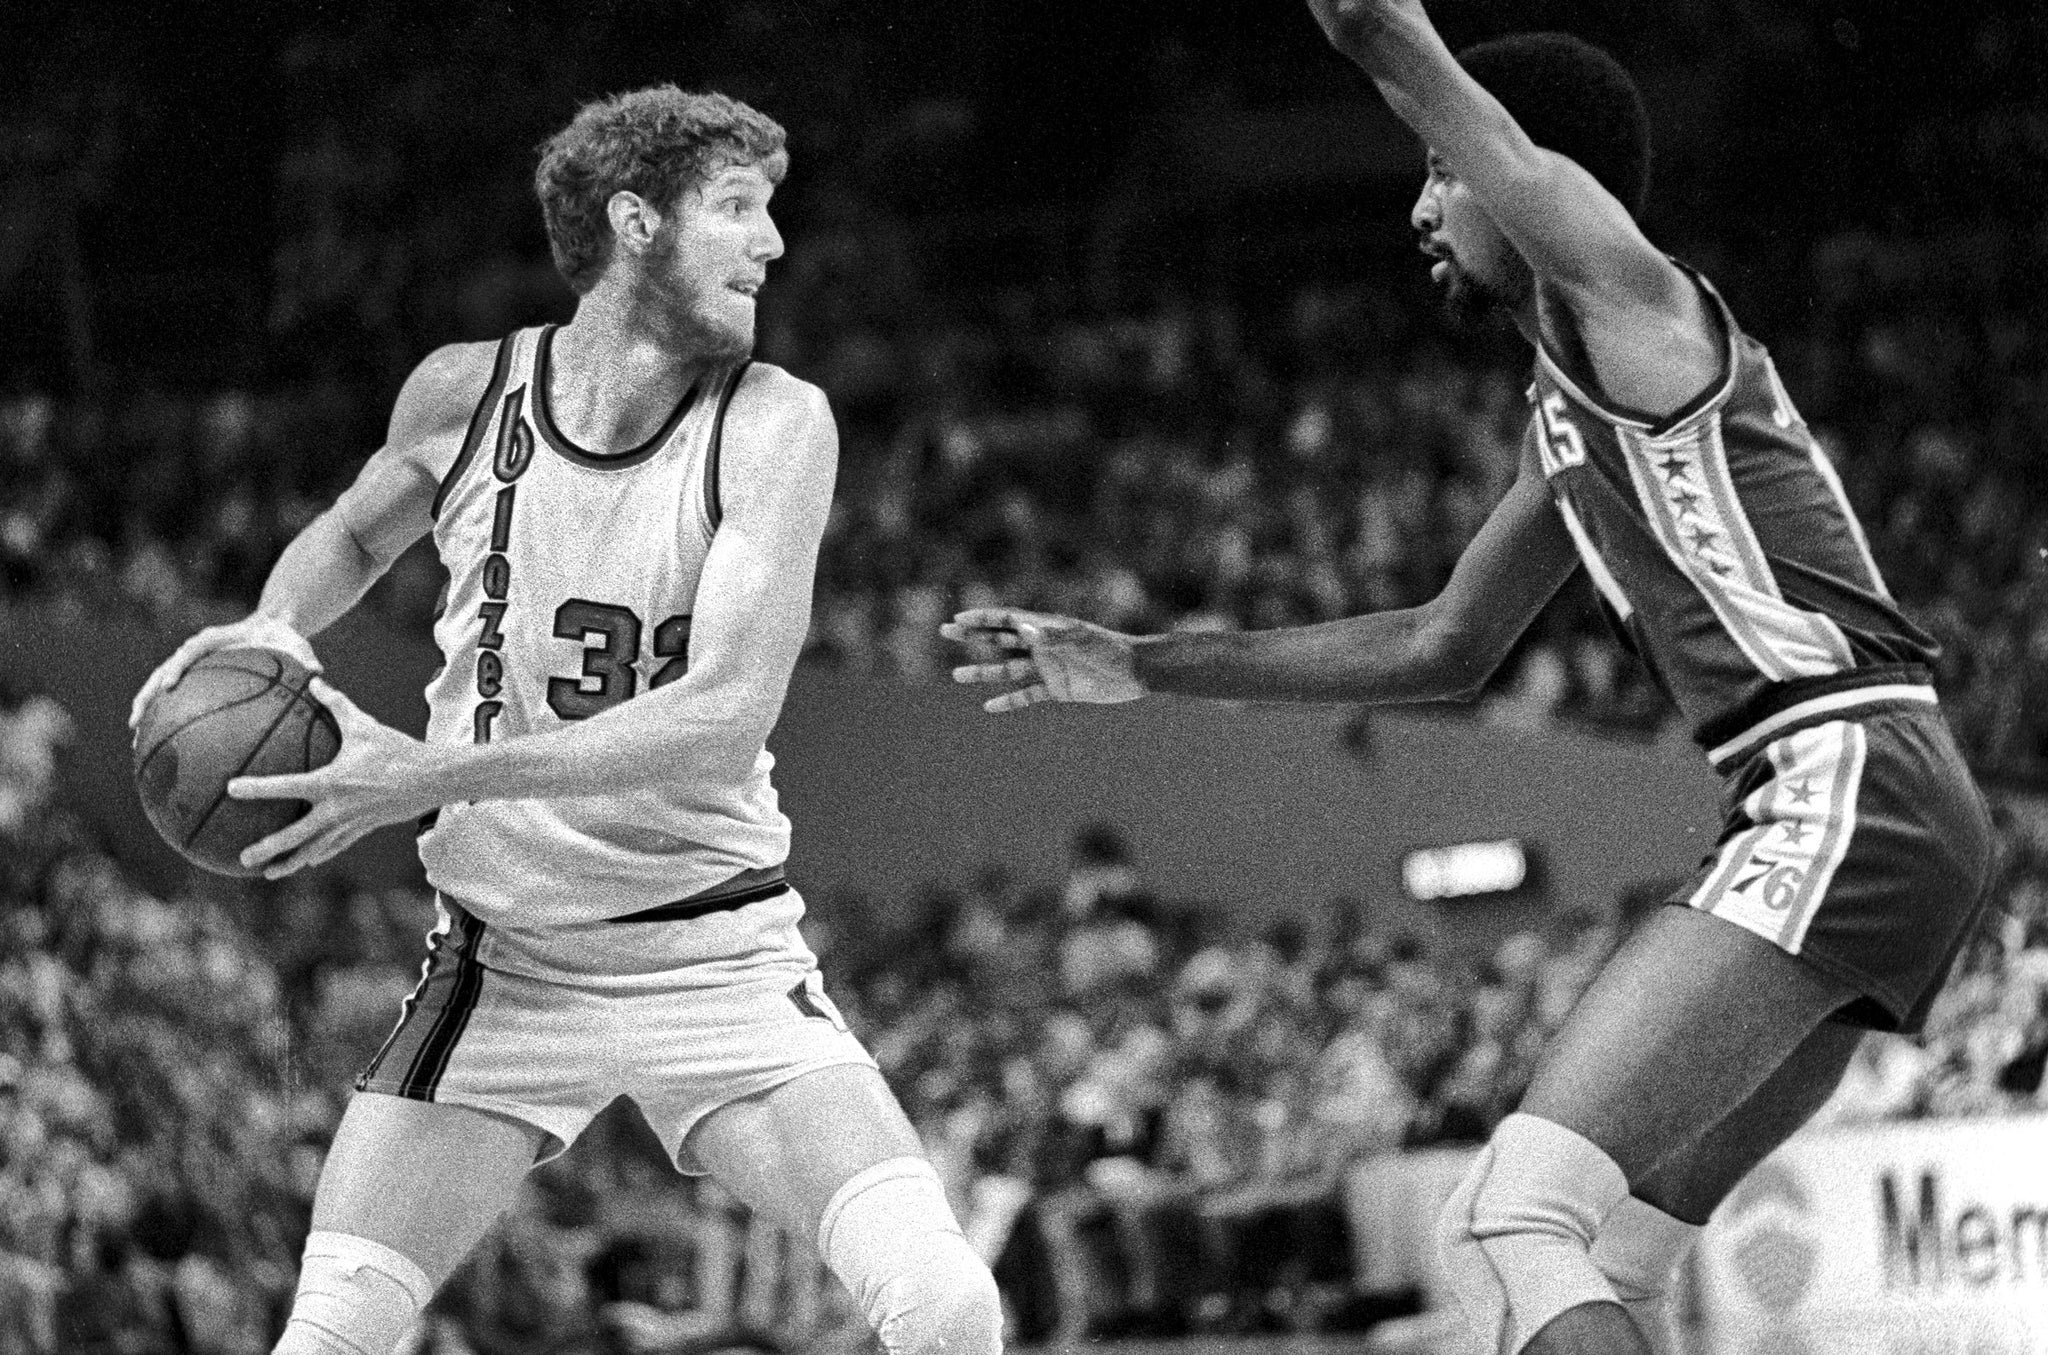 Bill Walton (32) was one of the best passing big men in the NBA. In the 1977 NBA Finals he led the Blazers with 5.2 assists per game. -- MICHAEL LLOYD / THE OREGONIAN/OREGONLIVE